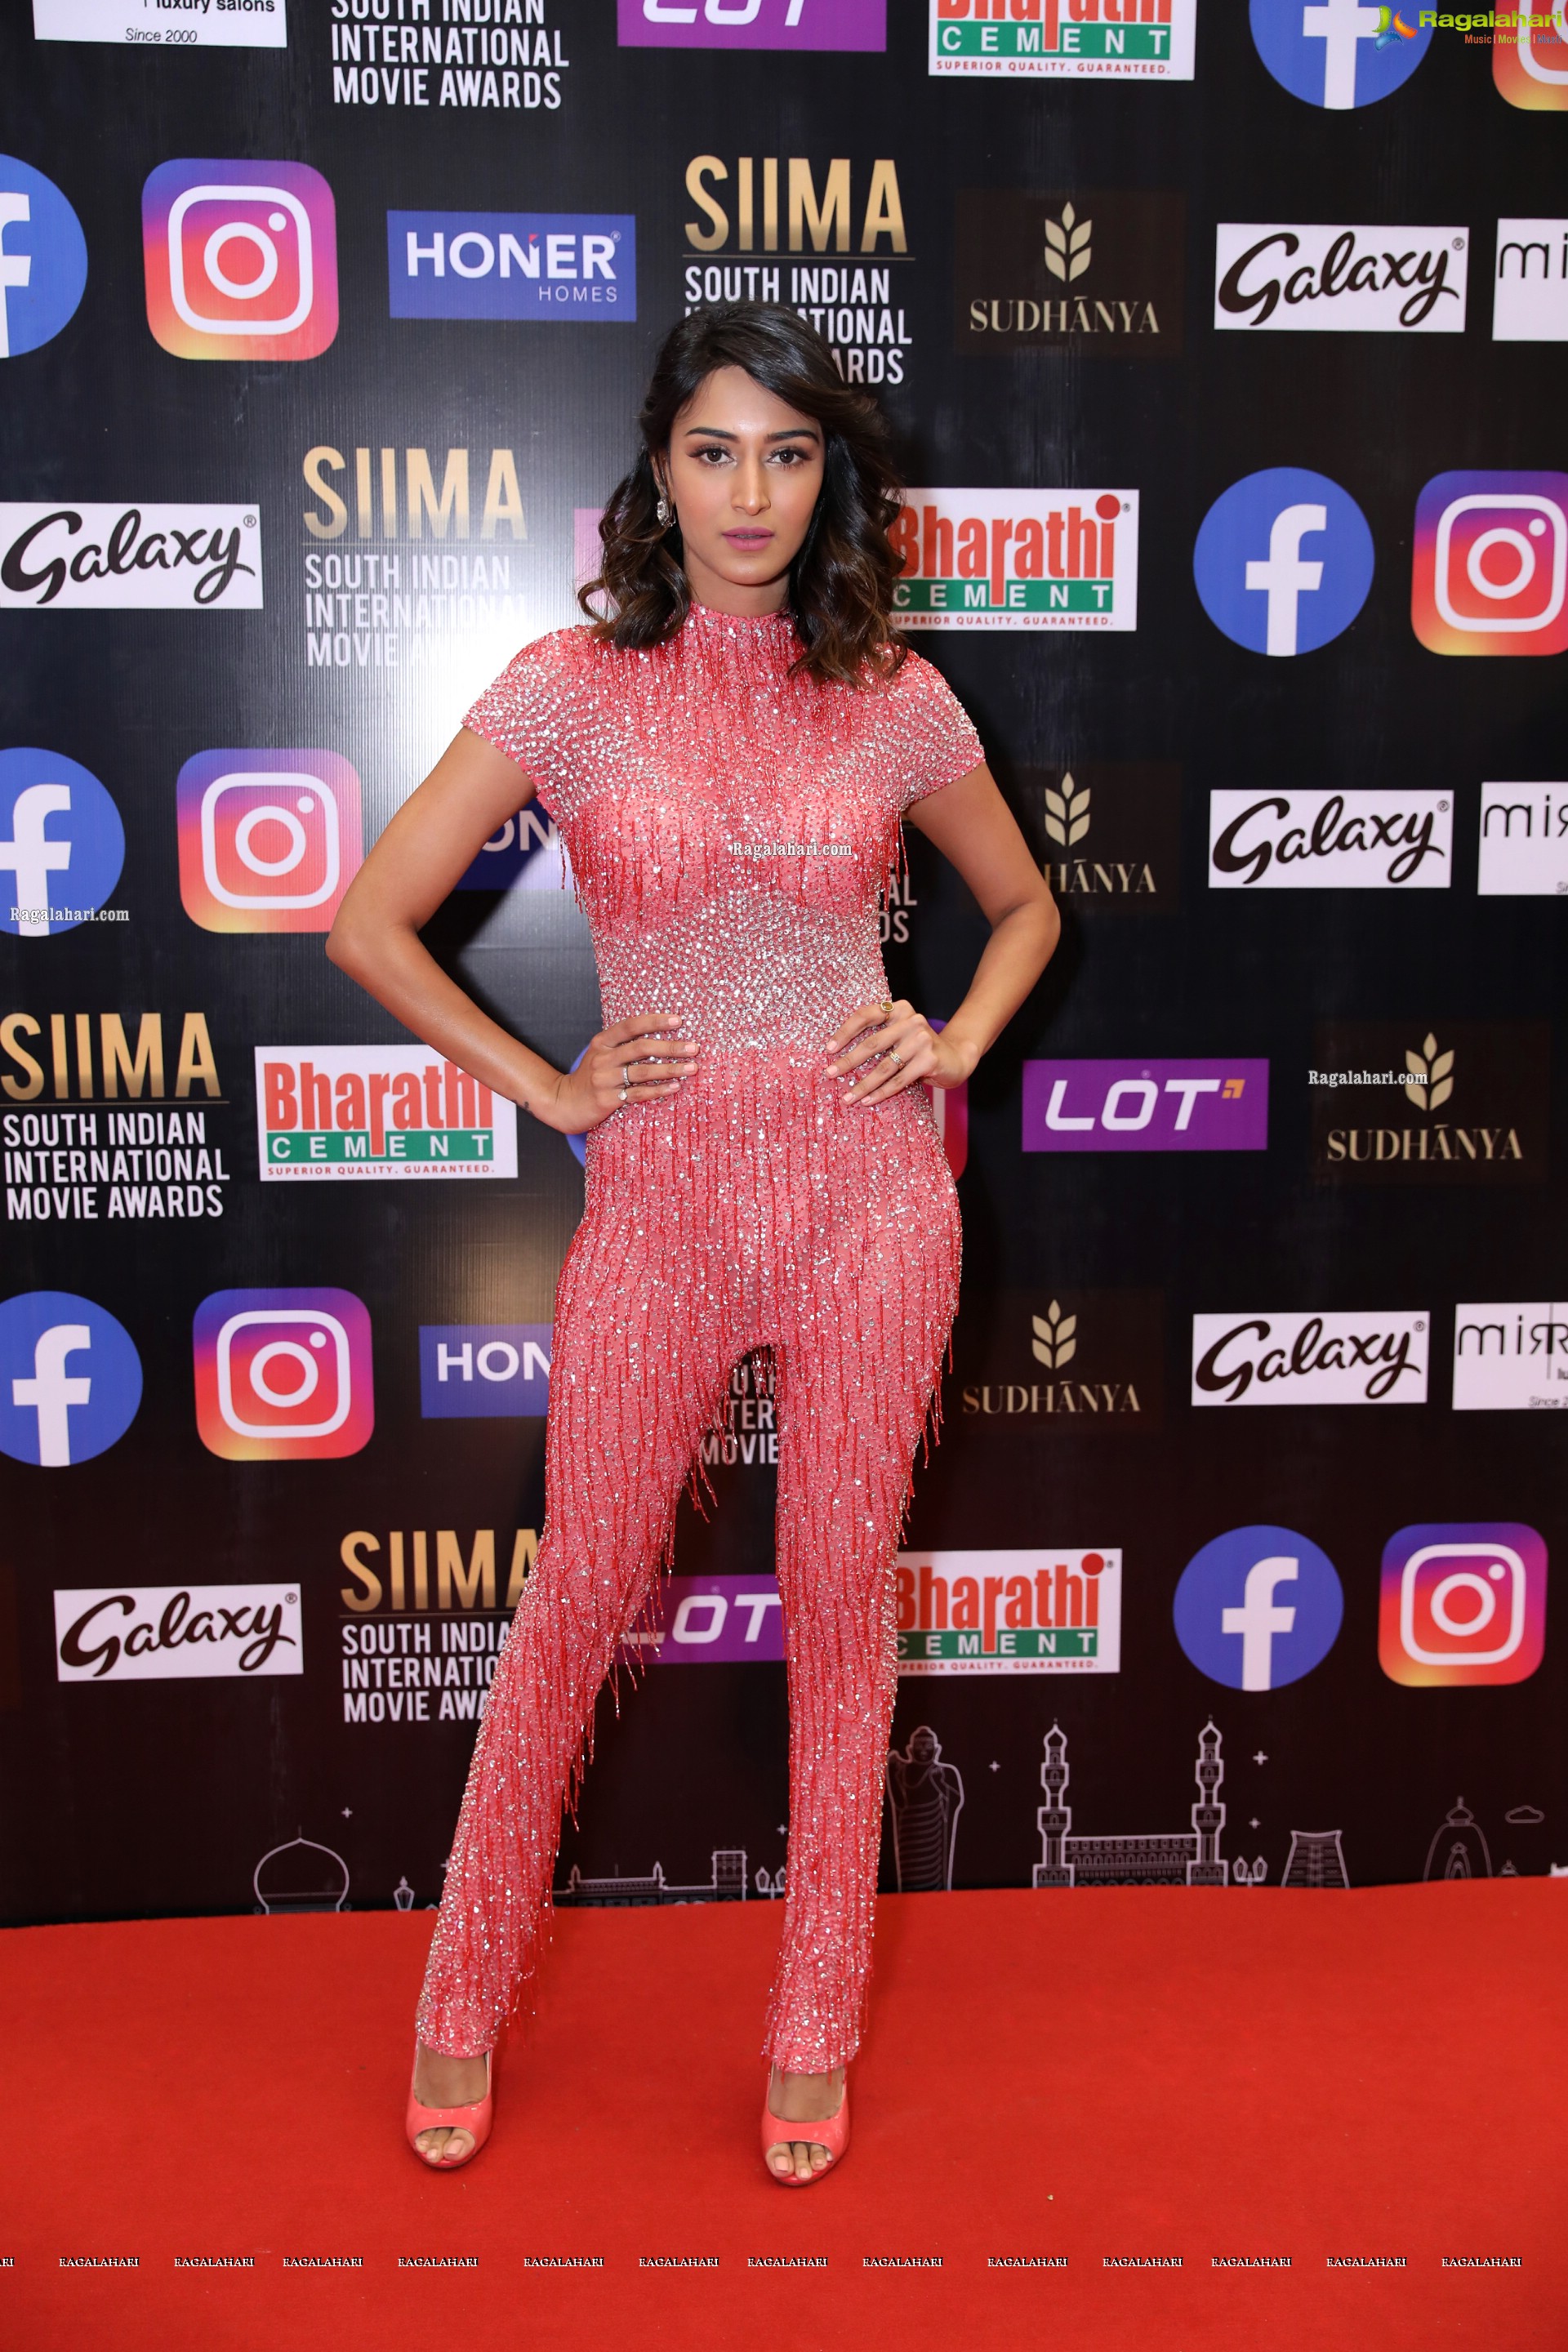 Erica Fernandes at SIIMA Awards 2021 Day 2, HD Photo Gallery